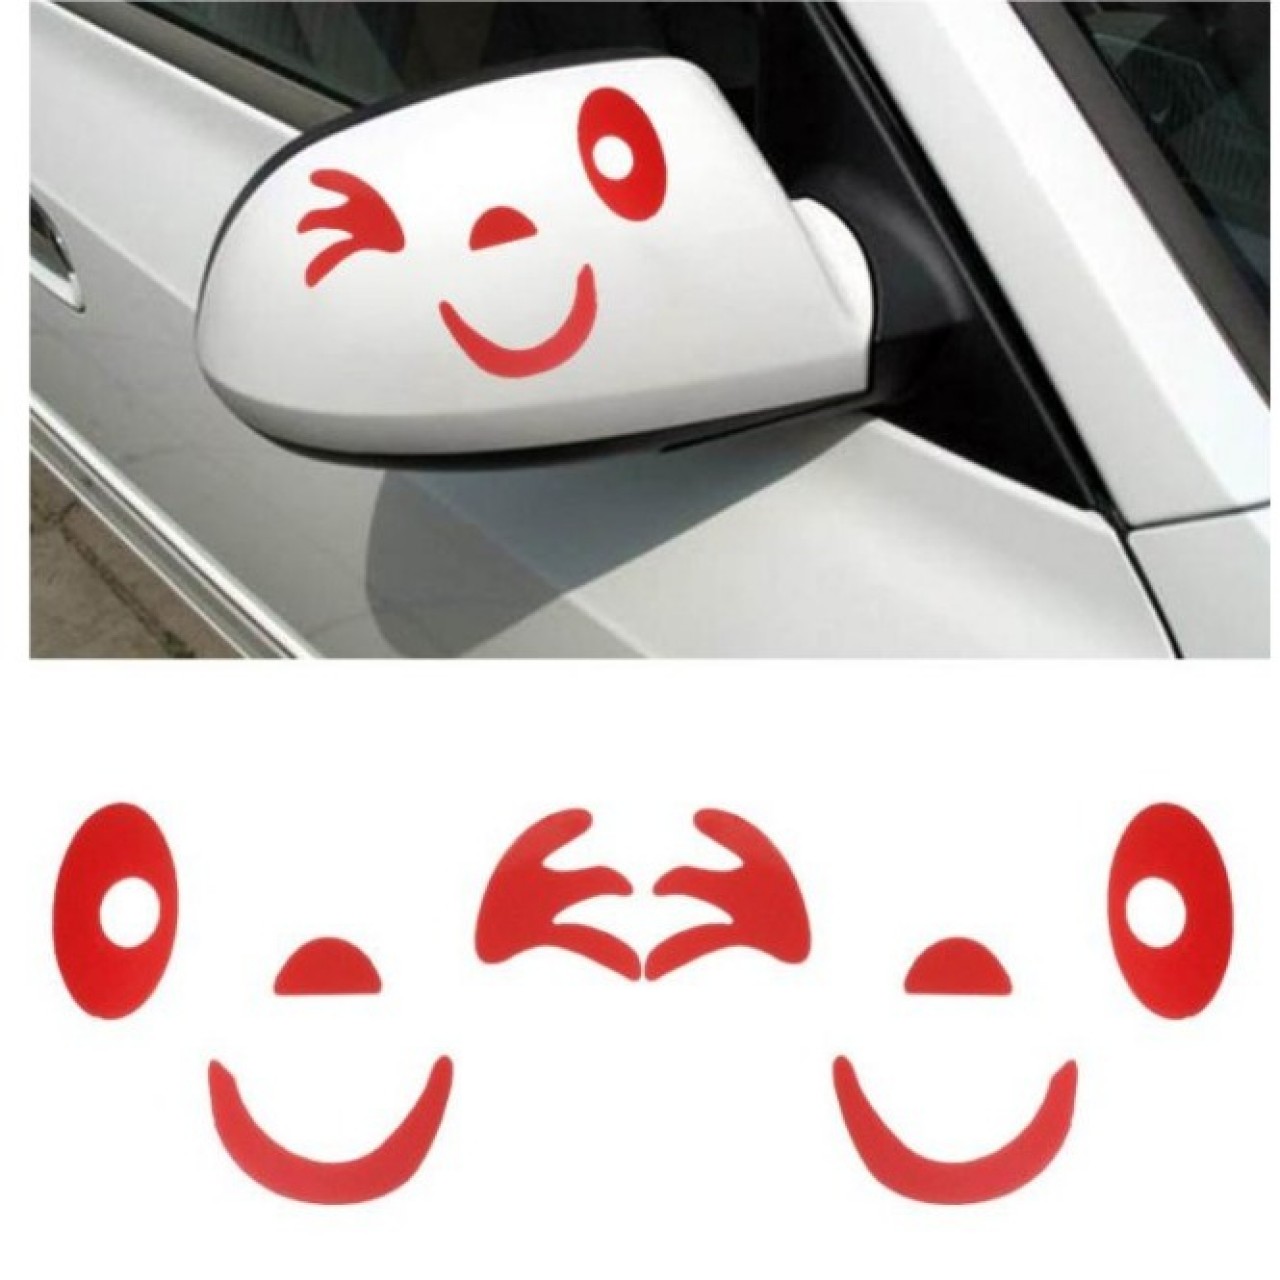 Smiling Blink Winks face car Styling Sticker - Red